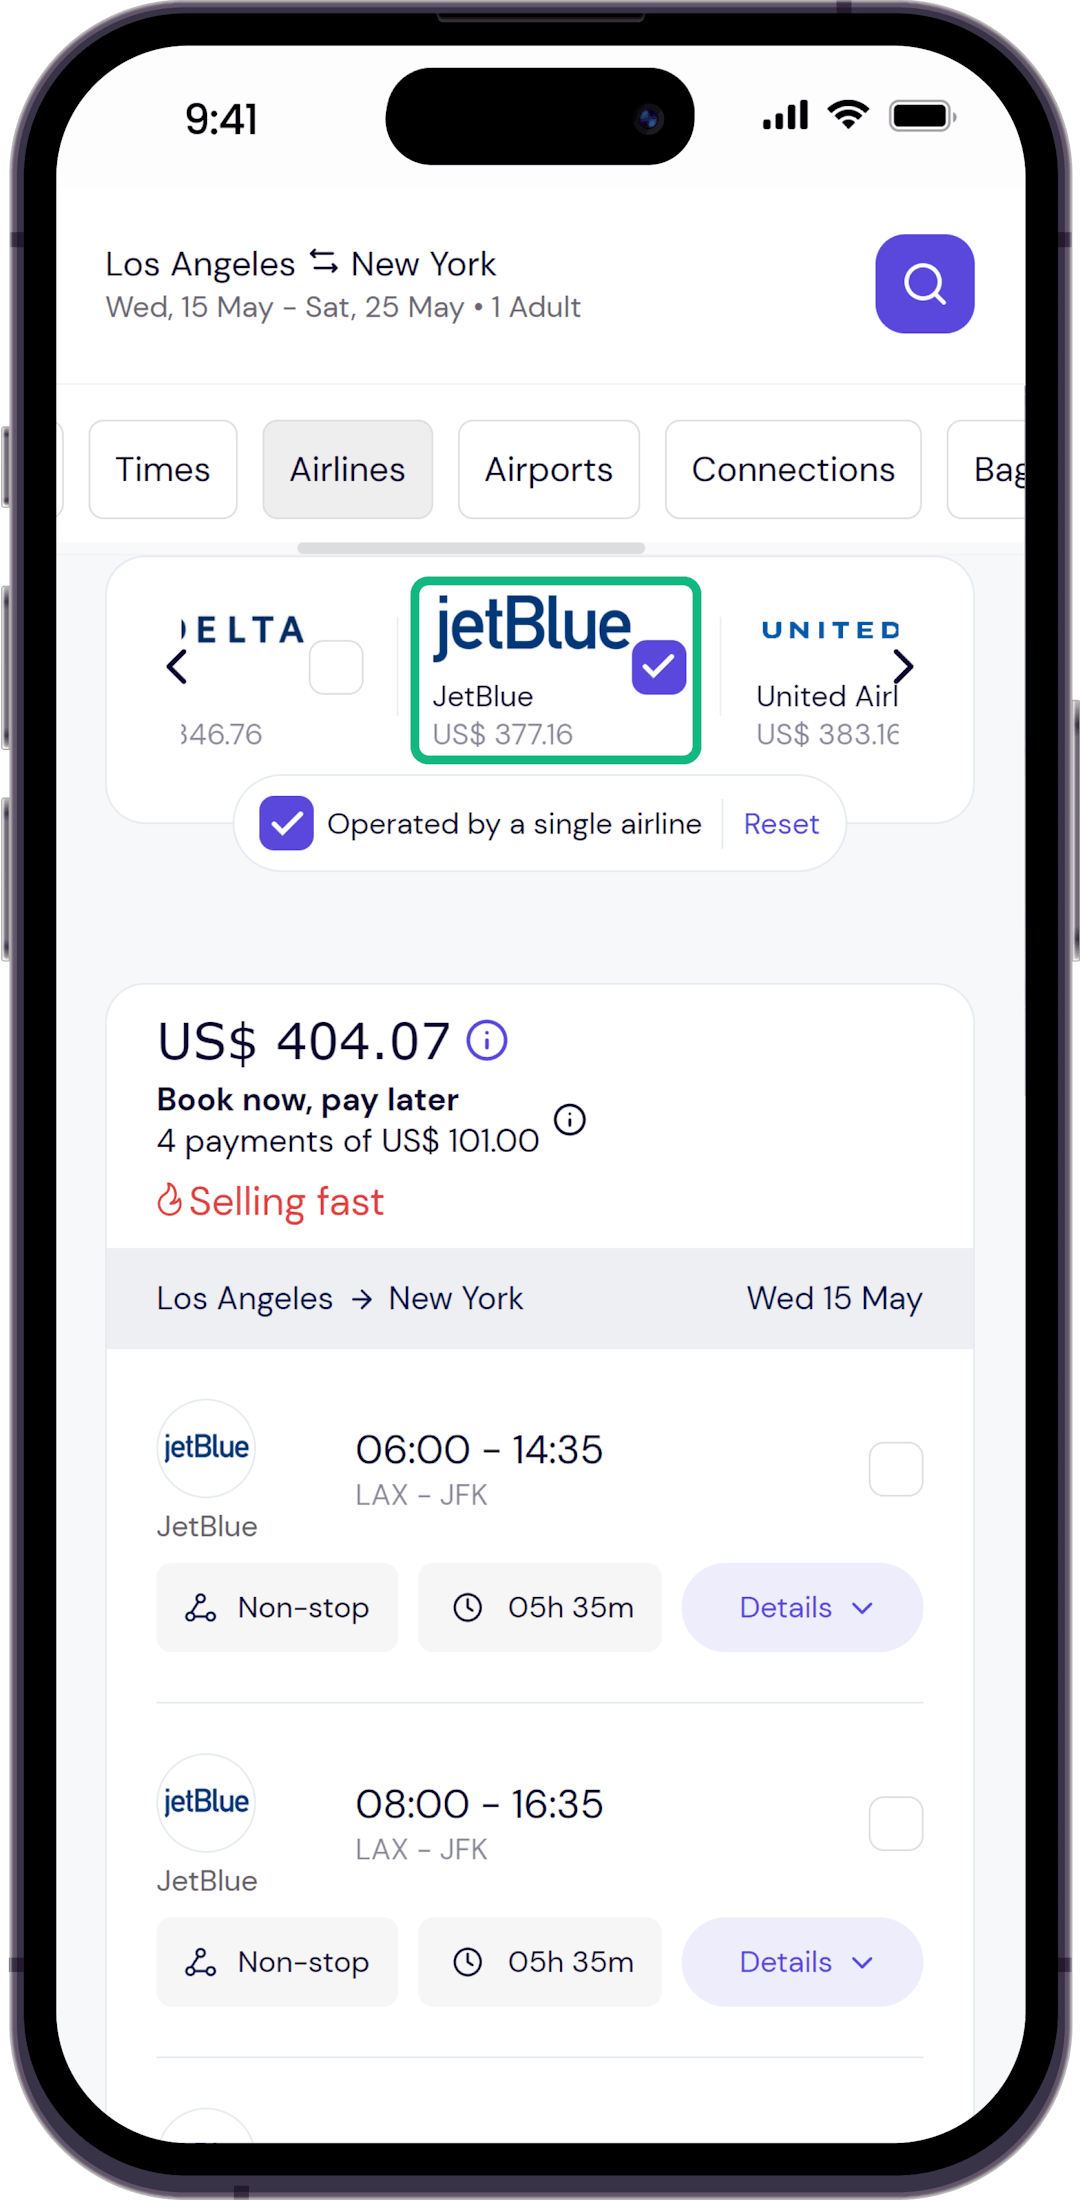 Step 2 - Select JetBlue as preferred airline to fly with